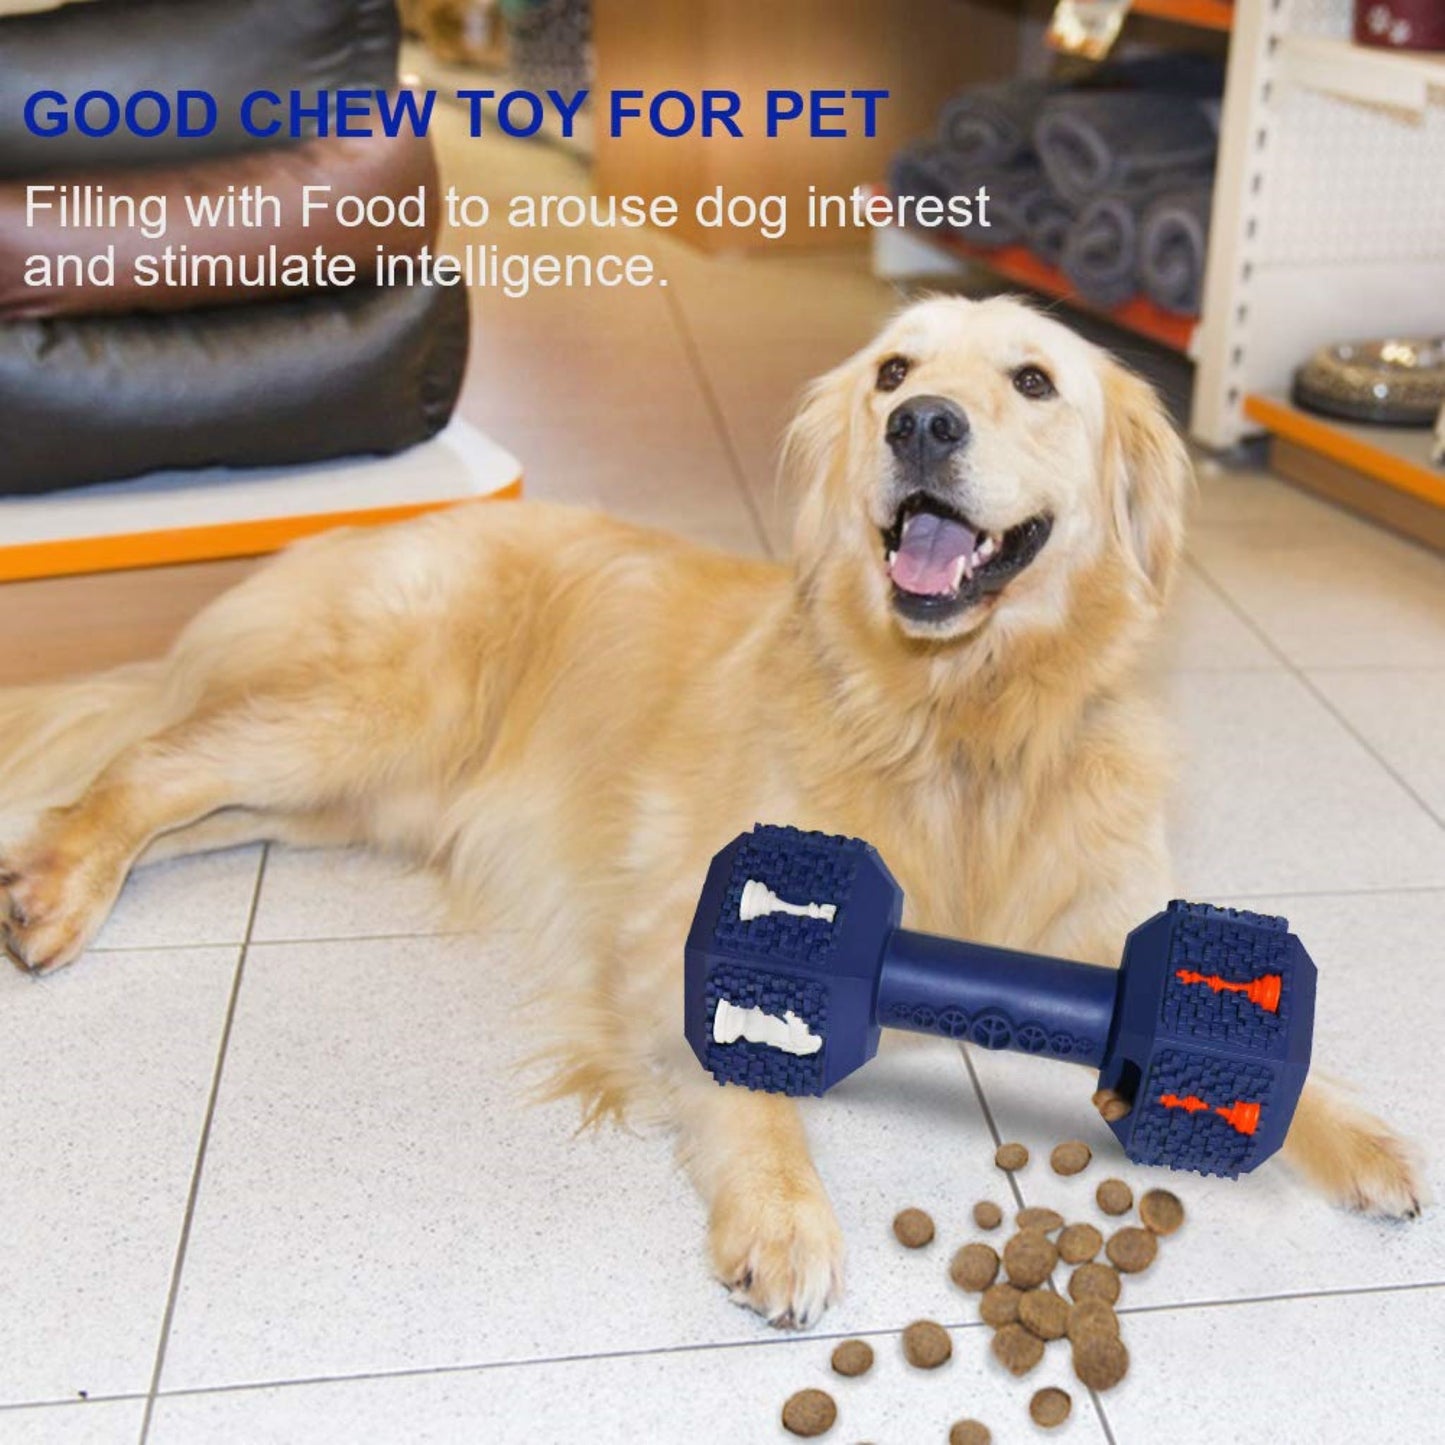 ROYAL PETS USA Indestructible, Durable & Tough Dumbell Dog Chew Toy for Aggressive Chewers. Slow Treat Dispensing Interactive Toys for S, M & L Breed -100% NATURAL RUBBER -10000 BITES TESTED - UNIQUE DESIGN FOR ORAL CARE